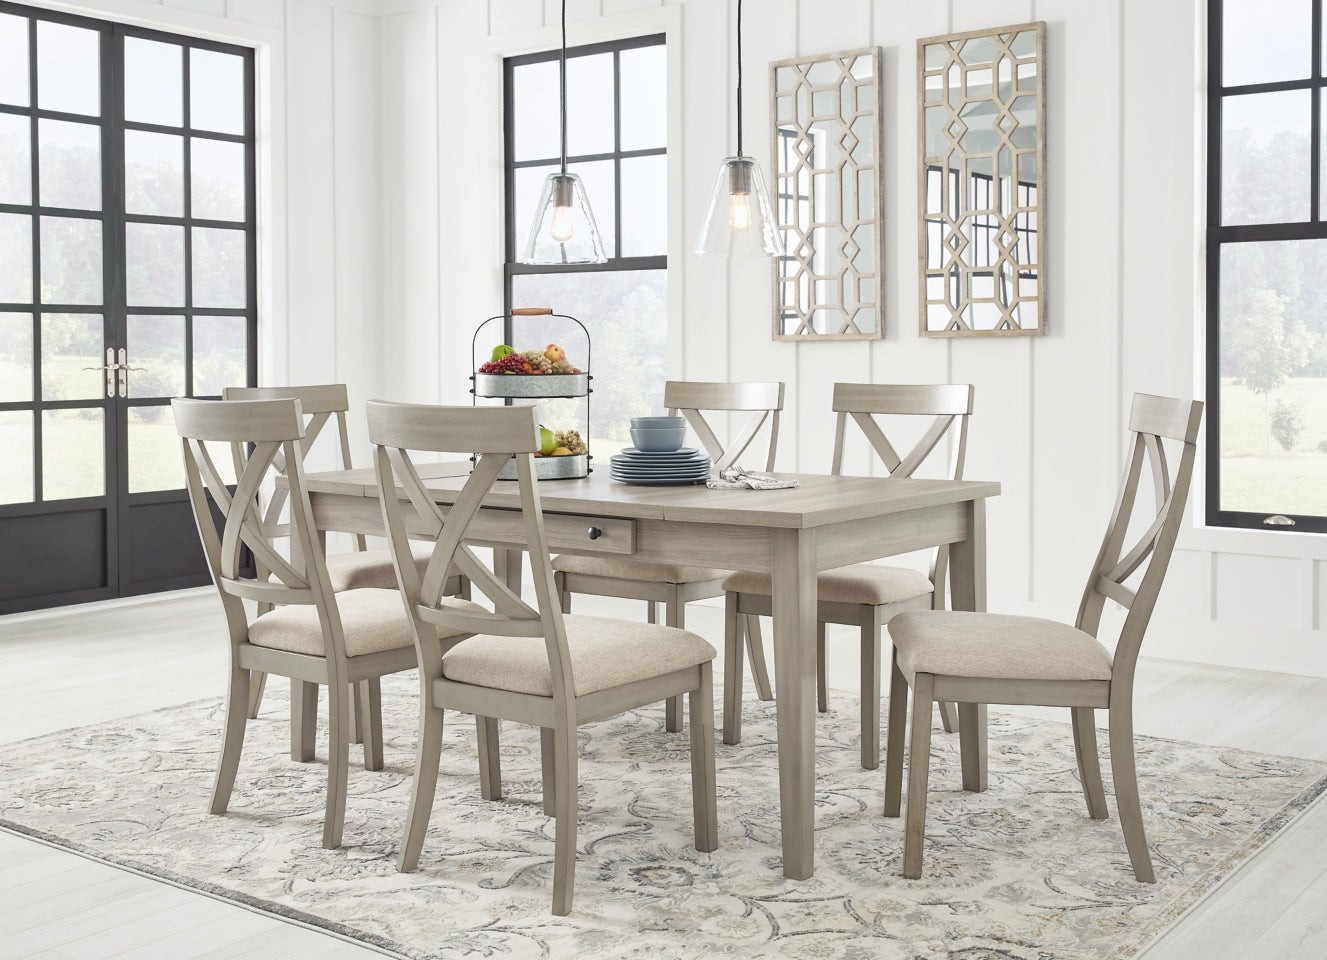 Parellen Dining Table and 6 Chairs - PKG013255 - furniture place usa